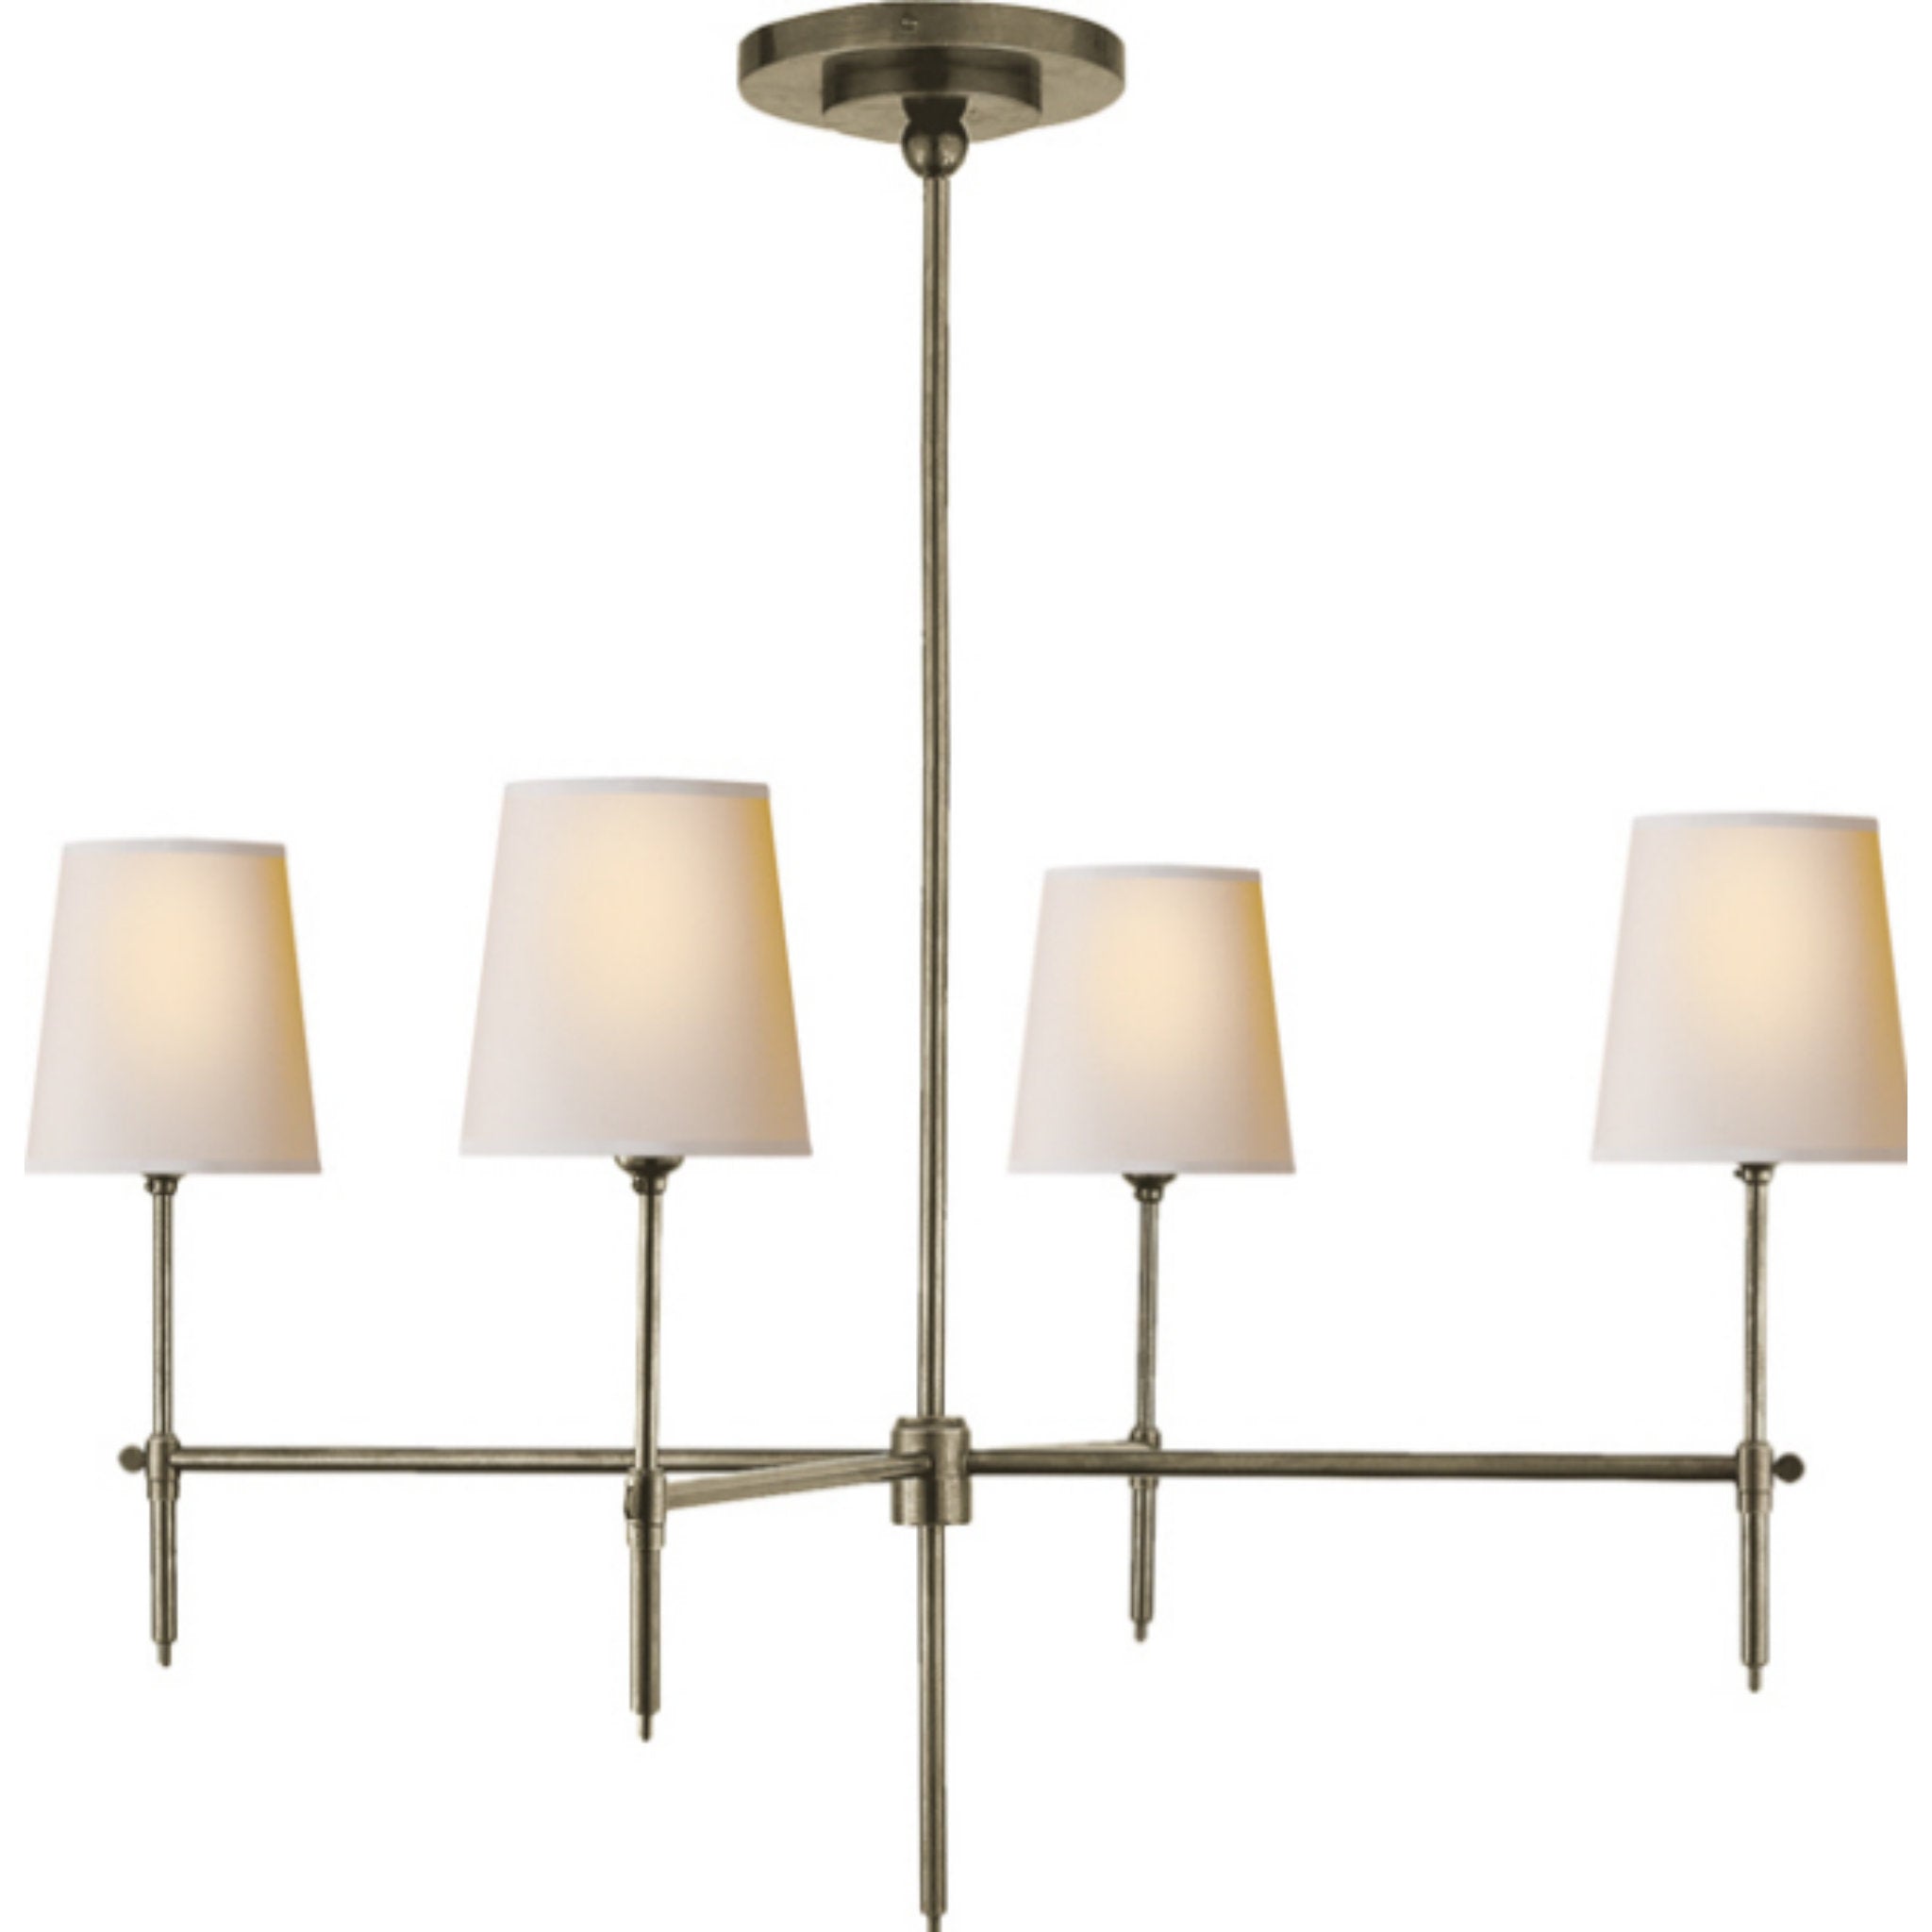 Thomas O'Brien Bryant Large Chandelier in Antique Nickel with Natural Paper Shades